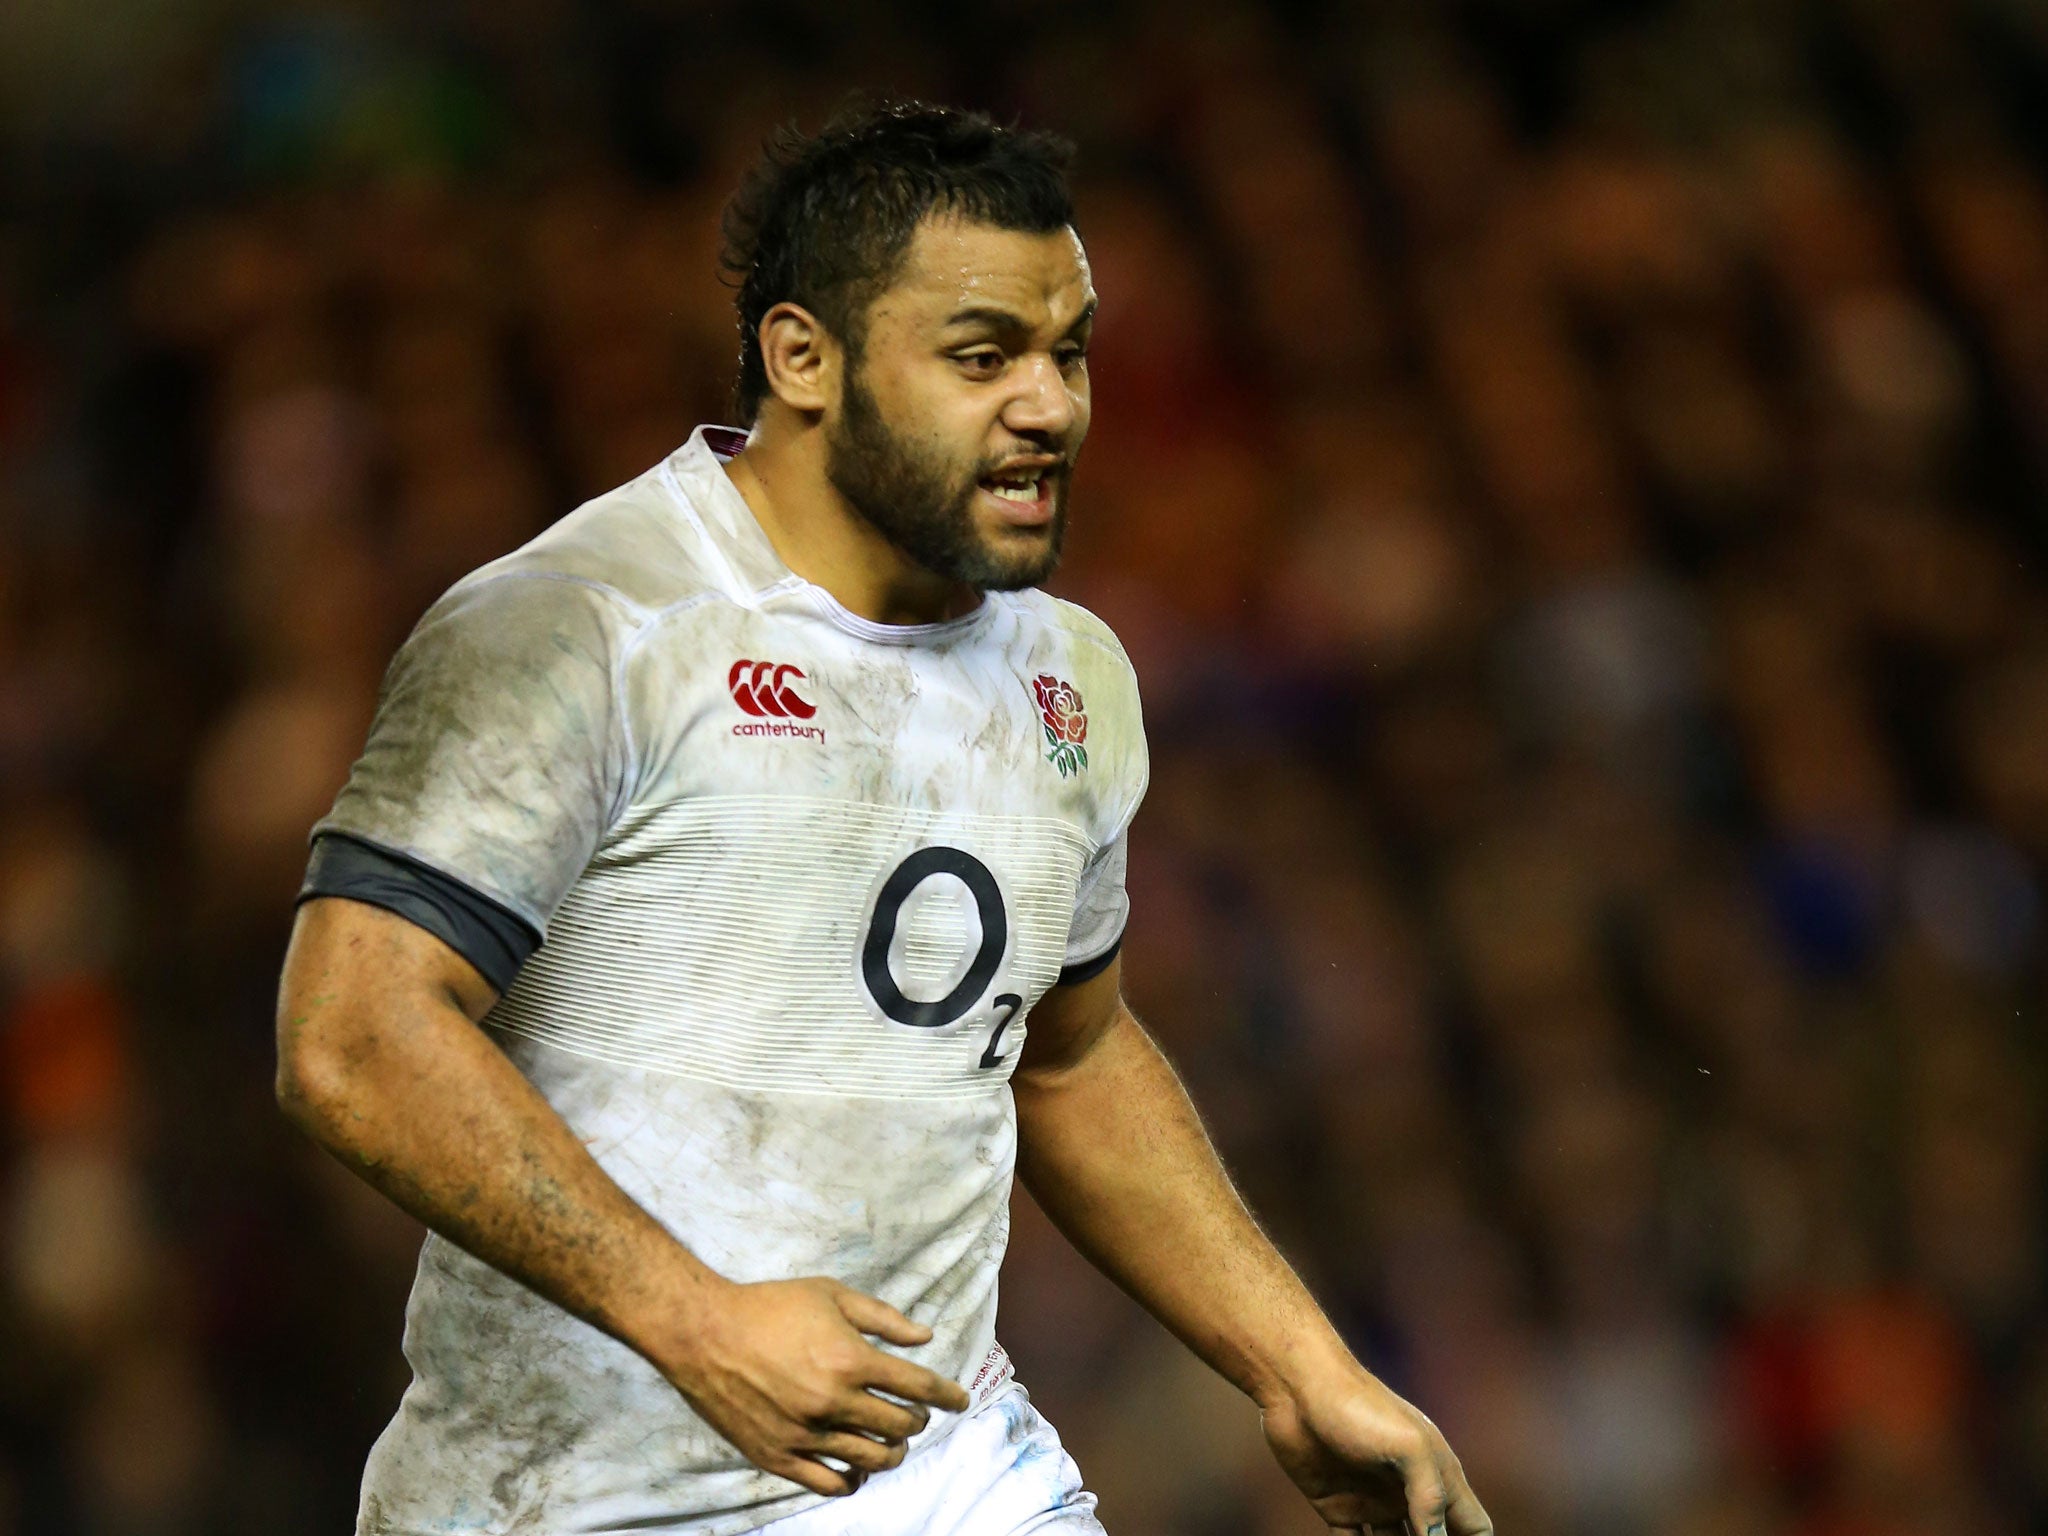 England number eight Billy Vunipola has praises Ireland pair Paul O'Connel and Brian O'Driscoll